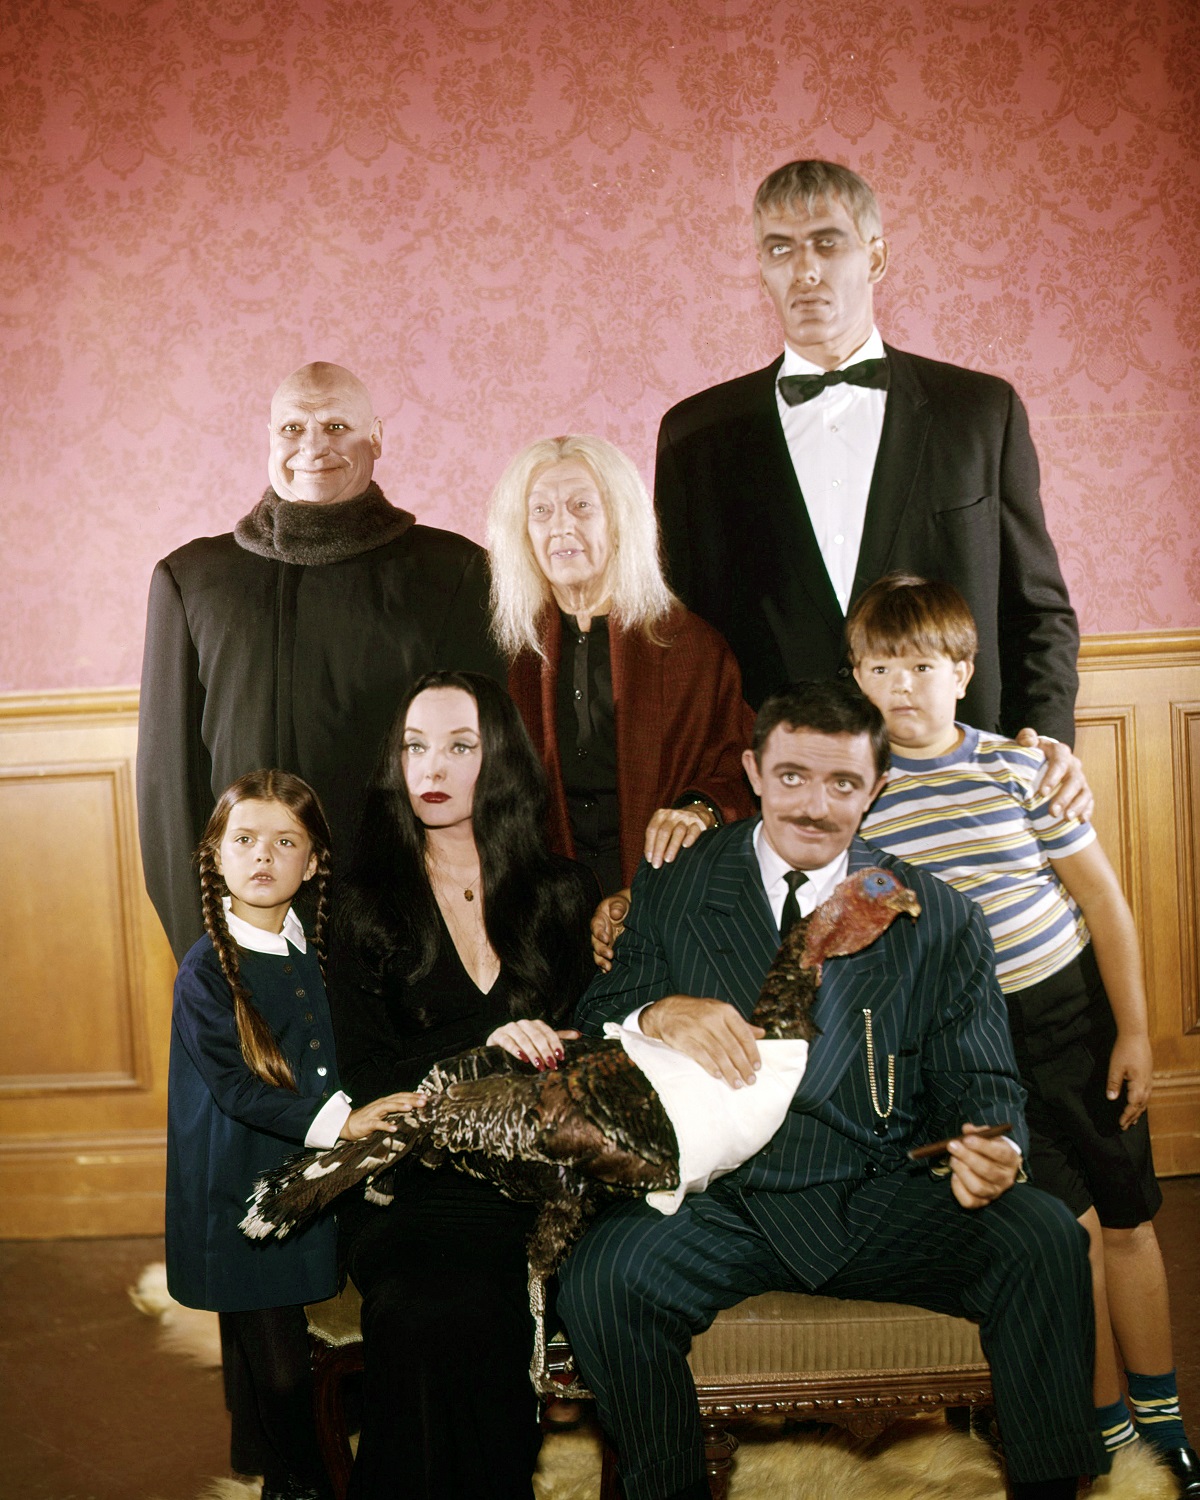 Jackie Coogan as Uncle Fester, Blossom Rock as Grandmama Addams, Ted Cassidy as Lurch. Lisa Loring as Wednesday Addams, Carolyn Jones as Morticia Addams, John Astin as Gomez Addams, and Ken Weatherwax as Pugsley Addams in a promotional photo for 'The Addams Family'